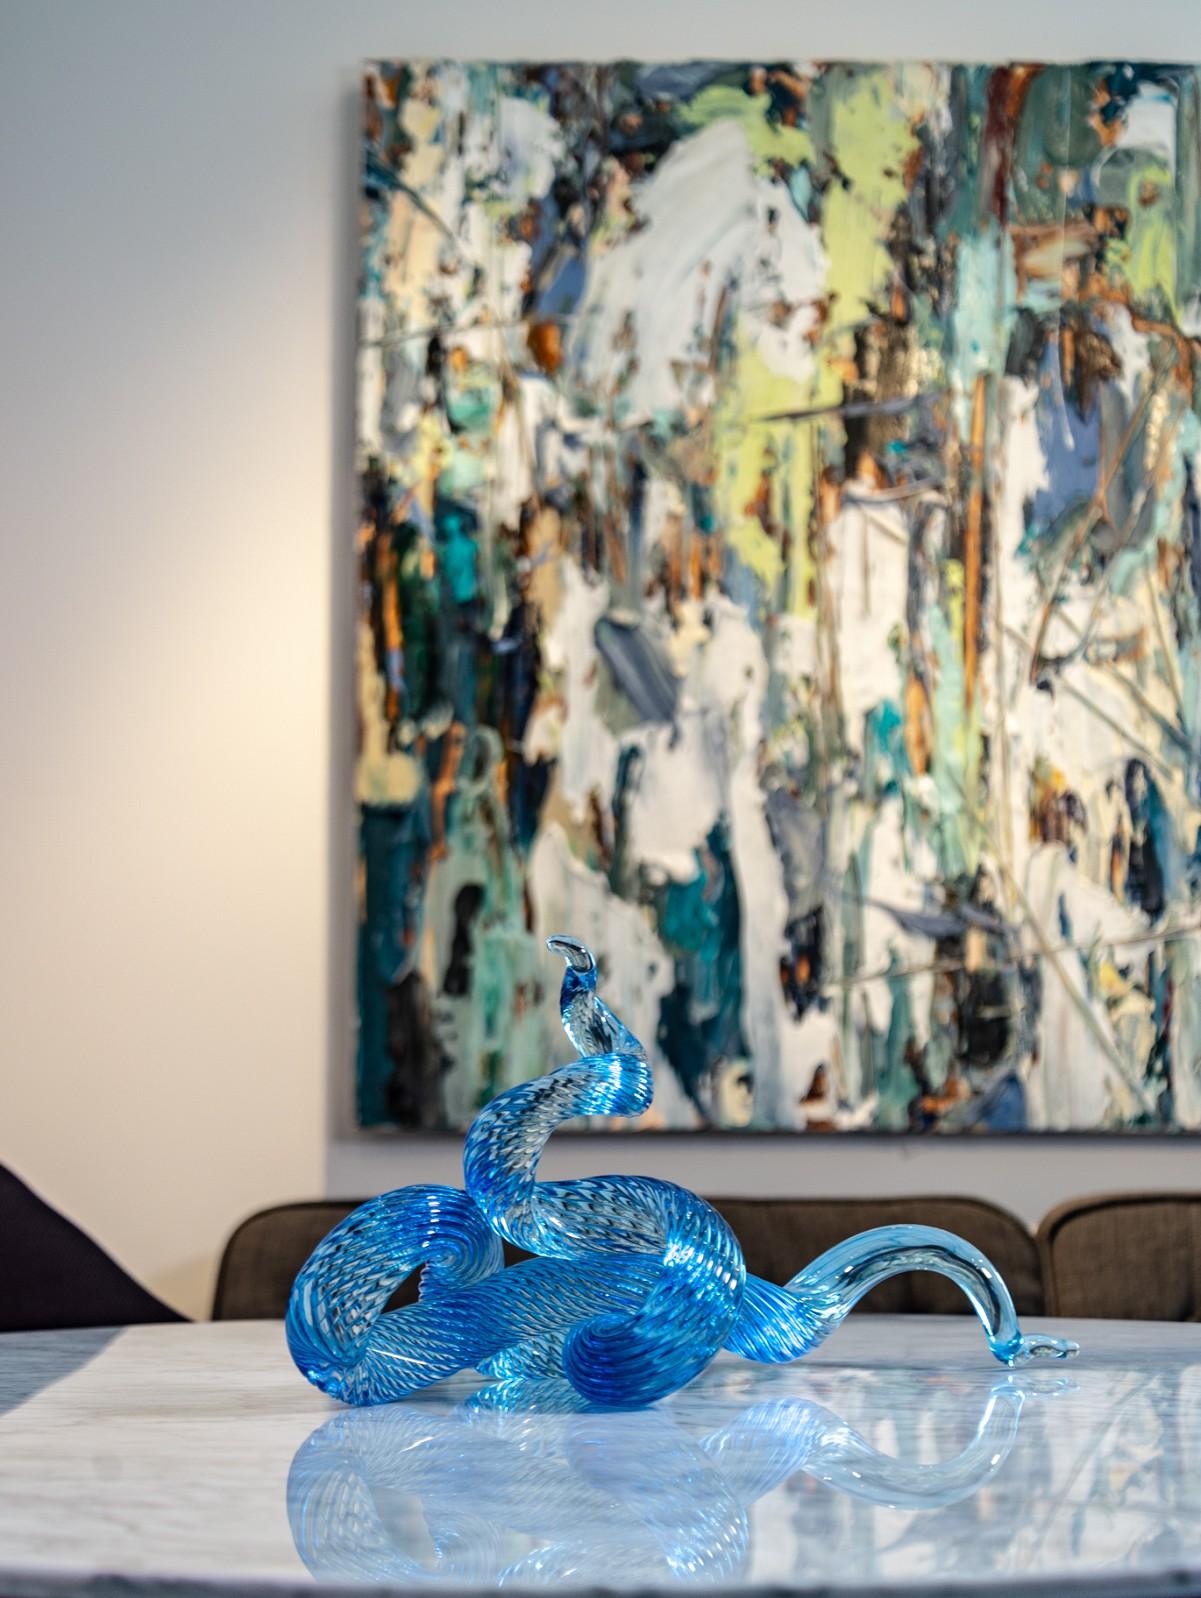 A single rod of translucent and striated marine blue glass is twisted, looped and shaped into an elegant wave by artist John Paul Robinson. The design is enhanced by light that sparkles on the complex surfaces of this table top sized